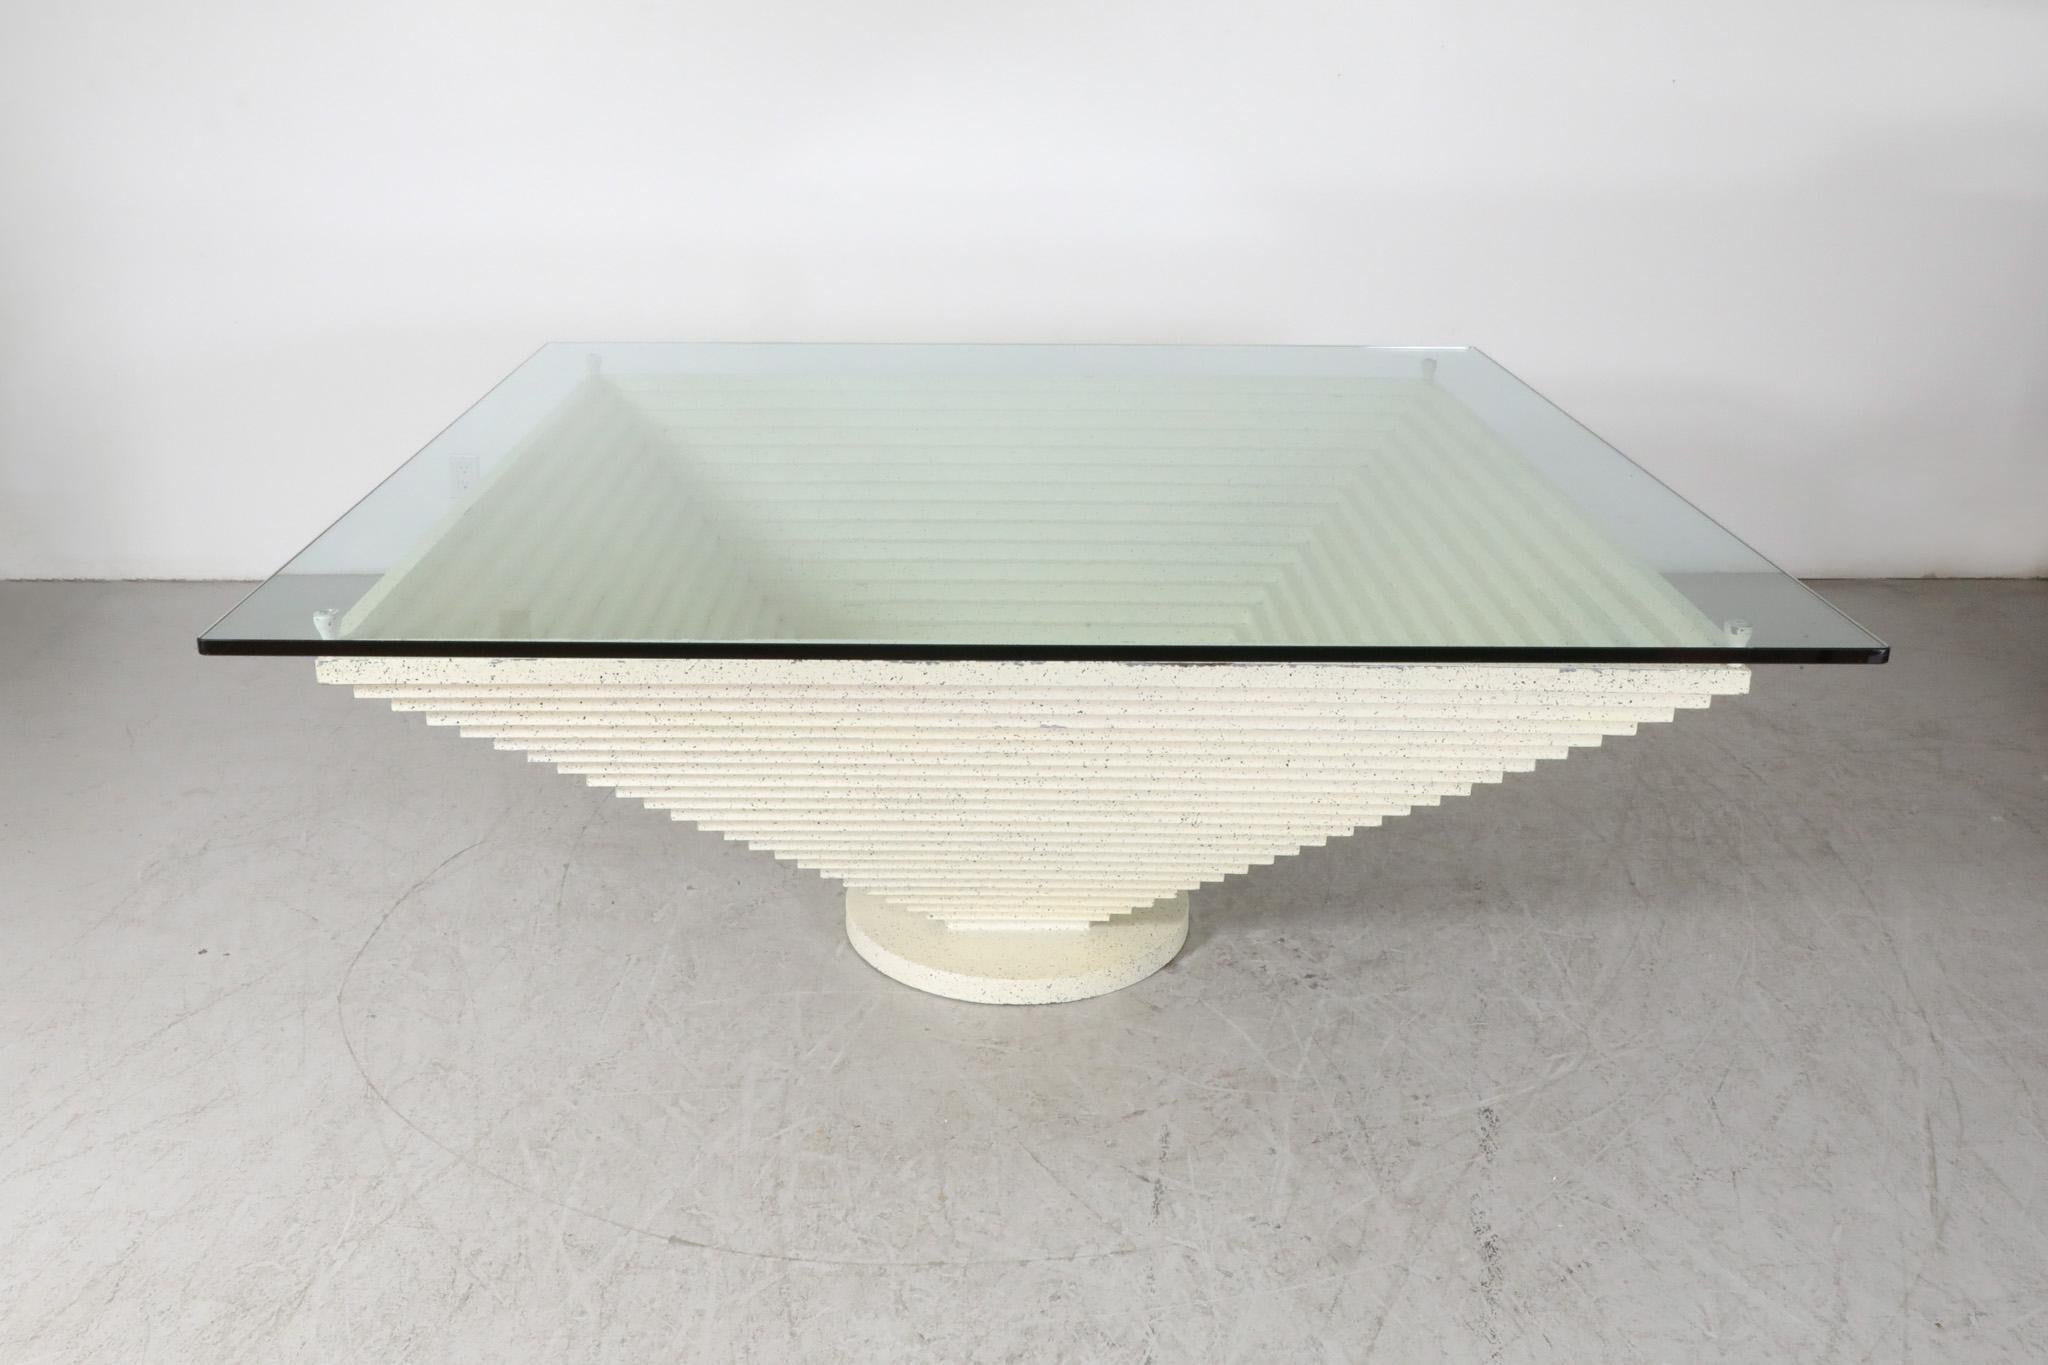 Giant Modernist Memphis Speckled Cream & Black Pyramid Table w/ Glass Top, 1980s For Sale 1